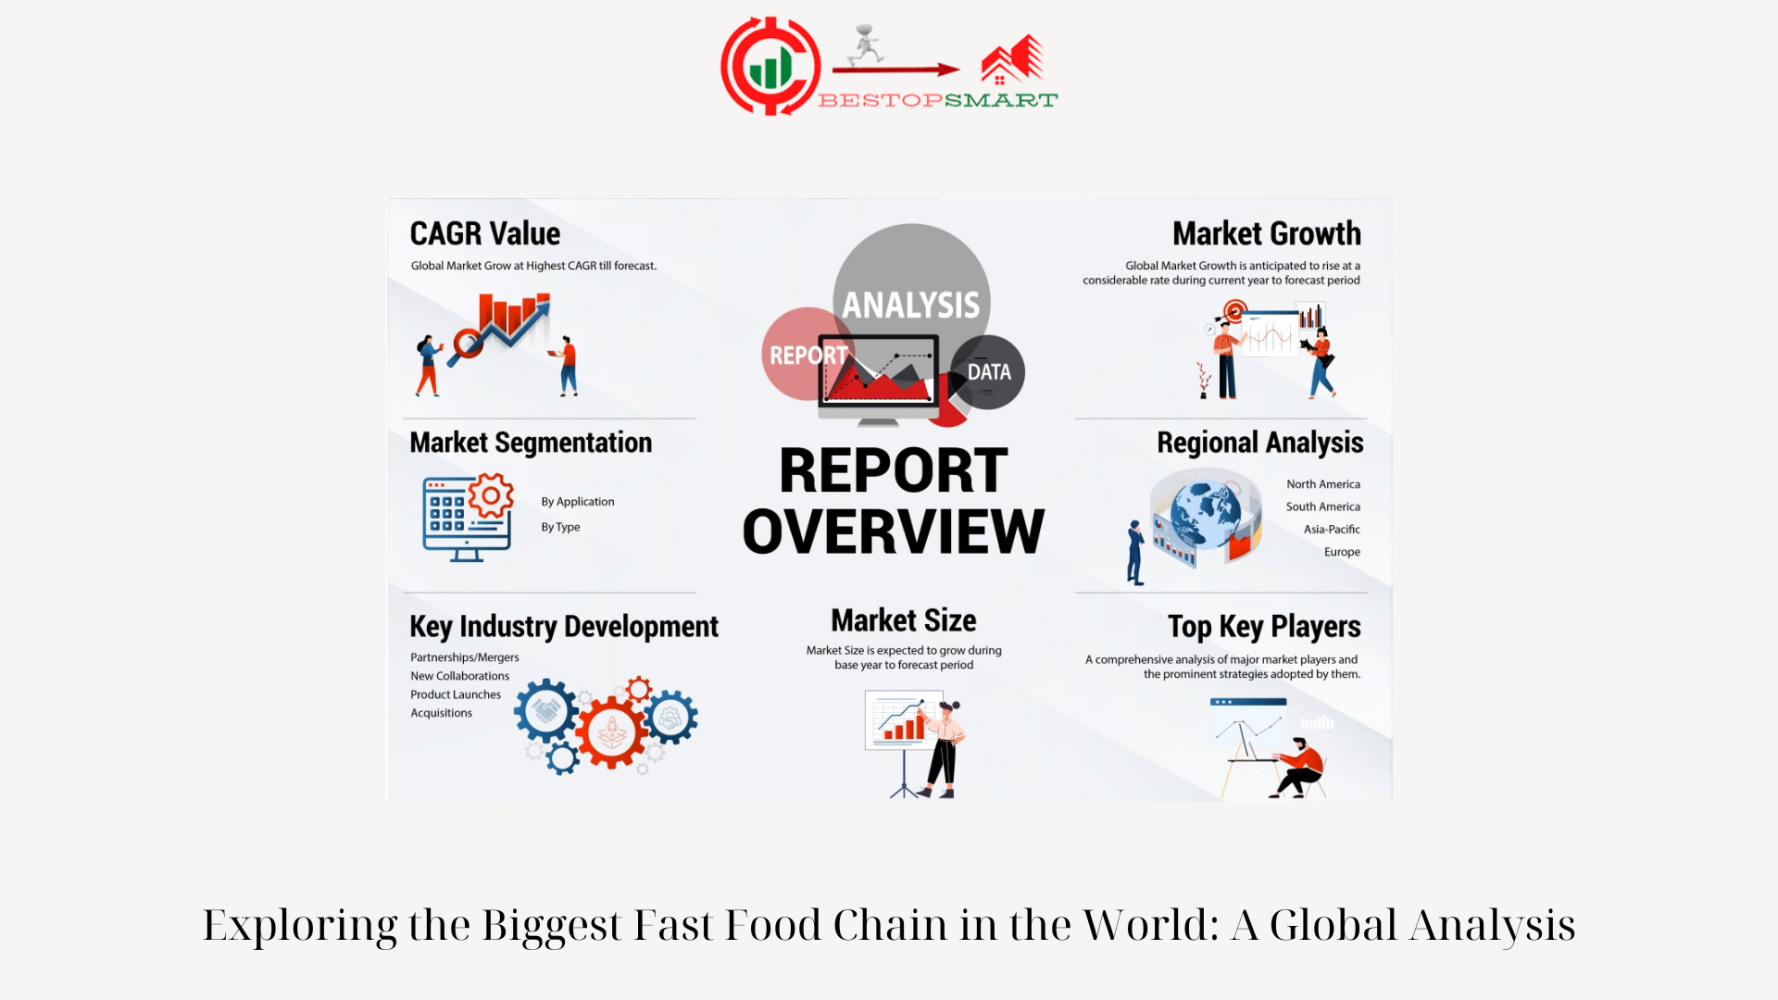 Exploring the Biggest Fast Food Chain in the World: A Global Analysis